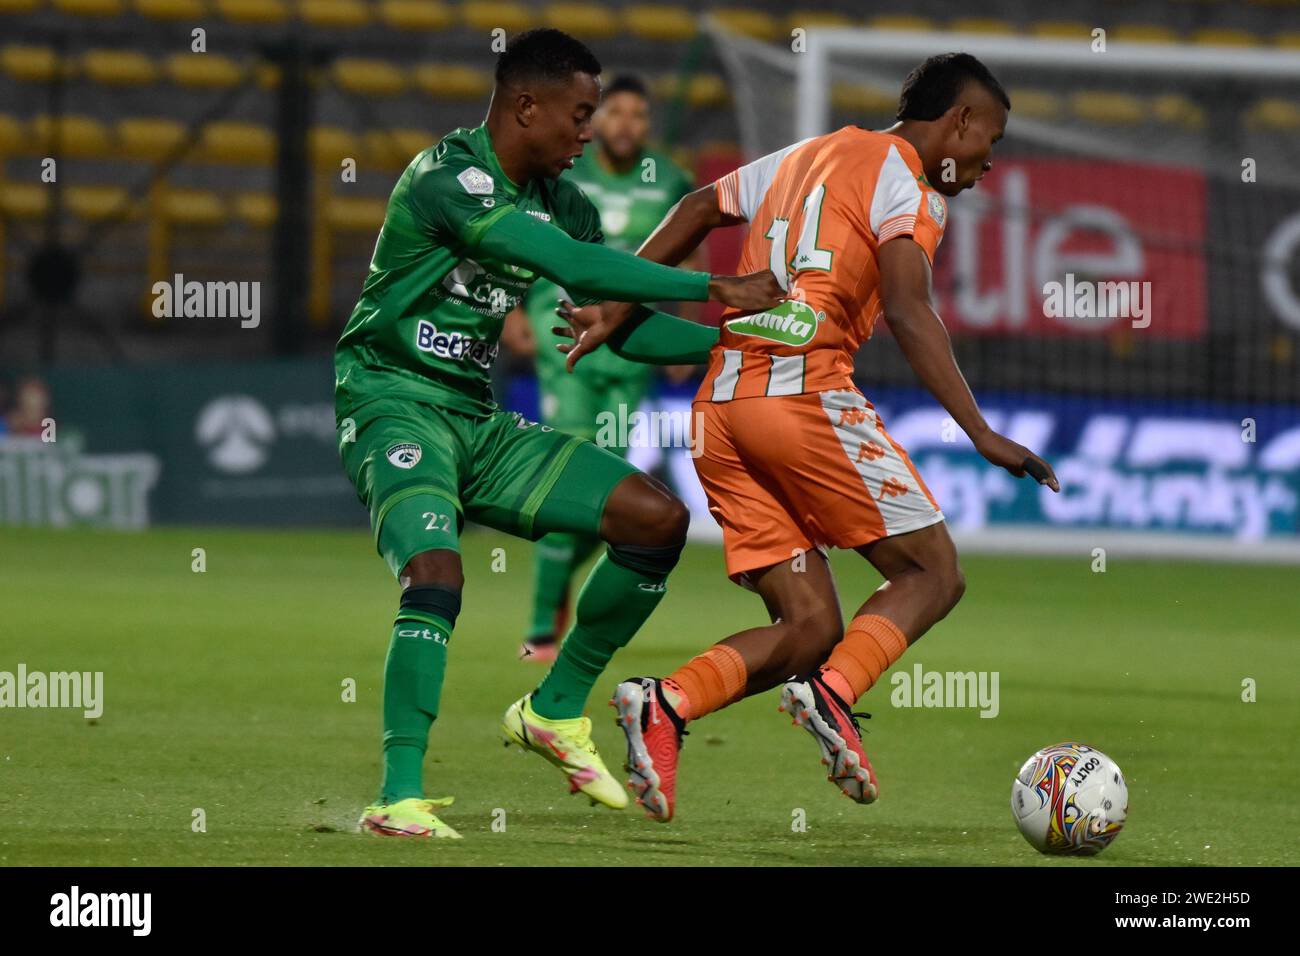 Bogota, Colombia. 22nd Jan, 2024. Equidad's David Camacho (L) and Envigado's David Camacho fight for the ball during the Equidad vs Envigado match for the Betplay Dimayor league in the Techo stadium in Bogota, Colombia, January 22, 2024. Photo by: Cristian Bayona/Long Visual Press Credit: Long Visual Press/Alamy Live News Stock Photo